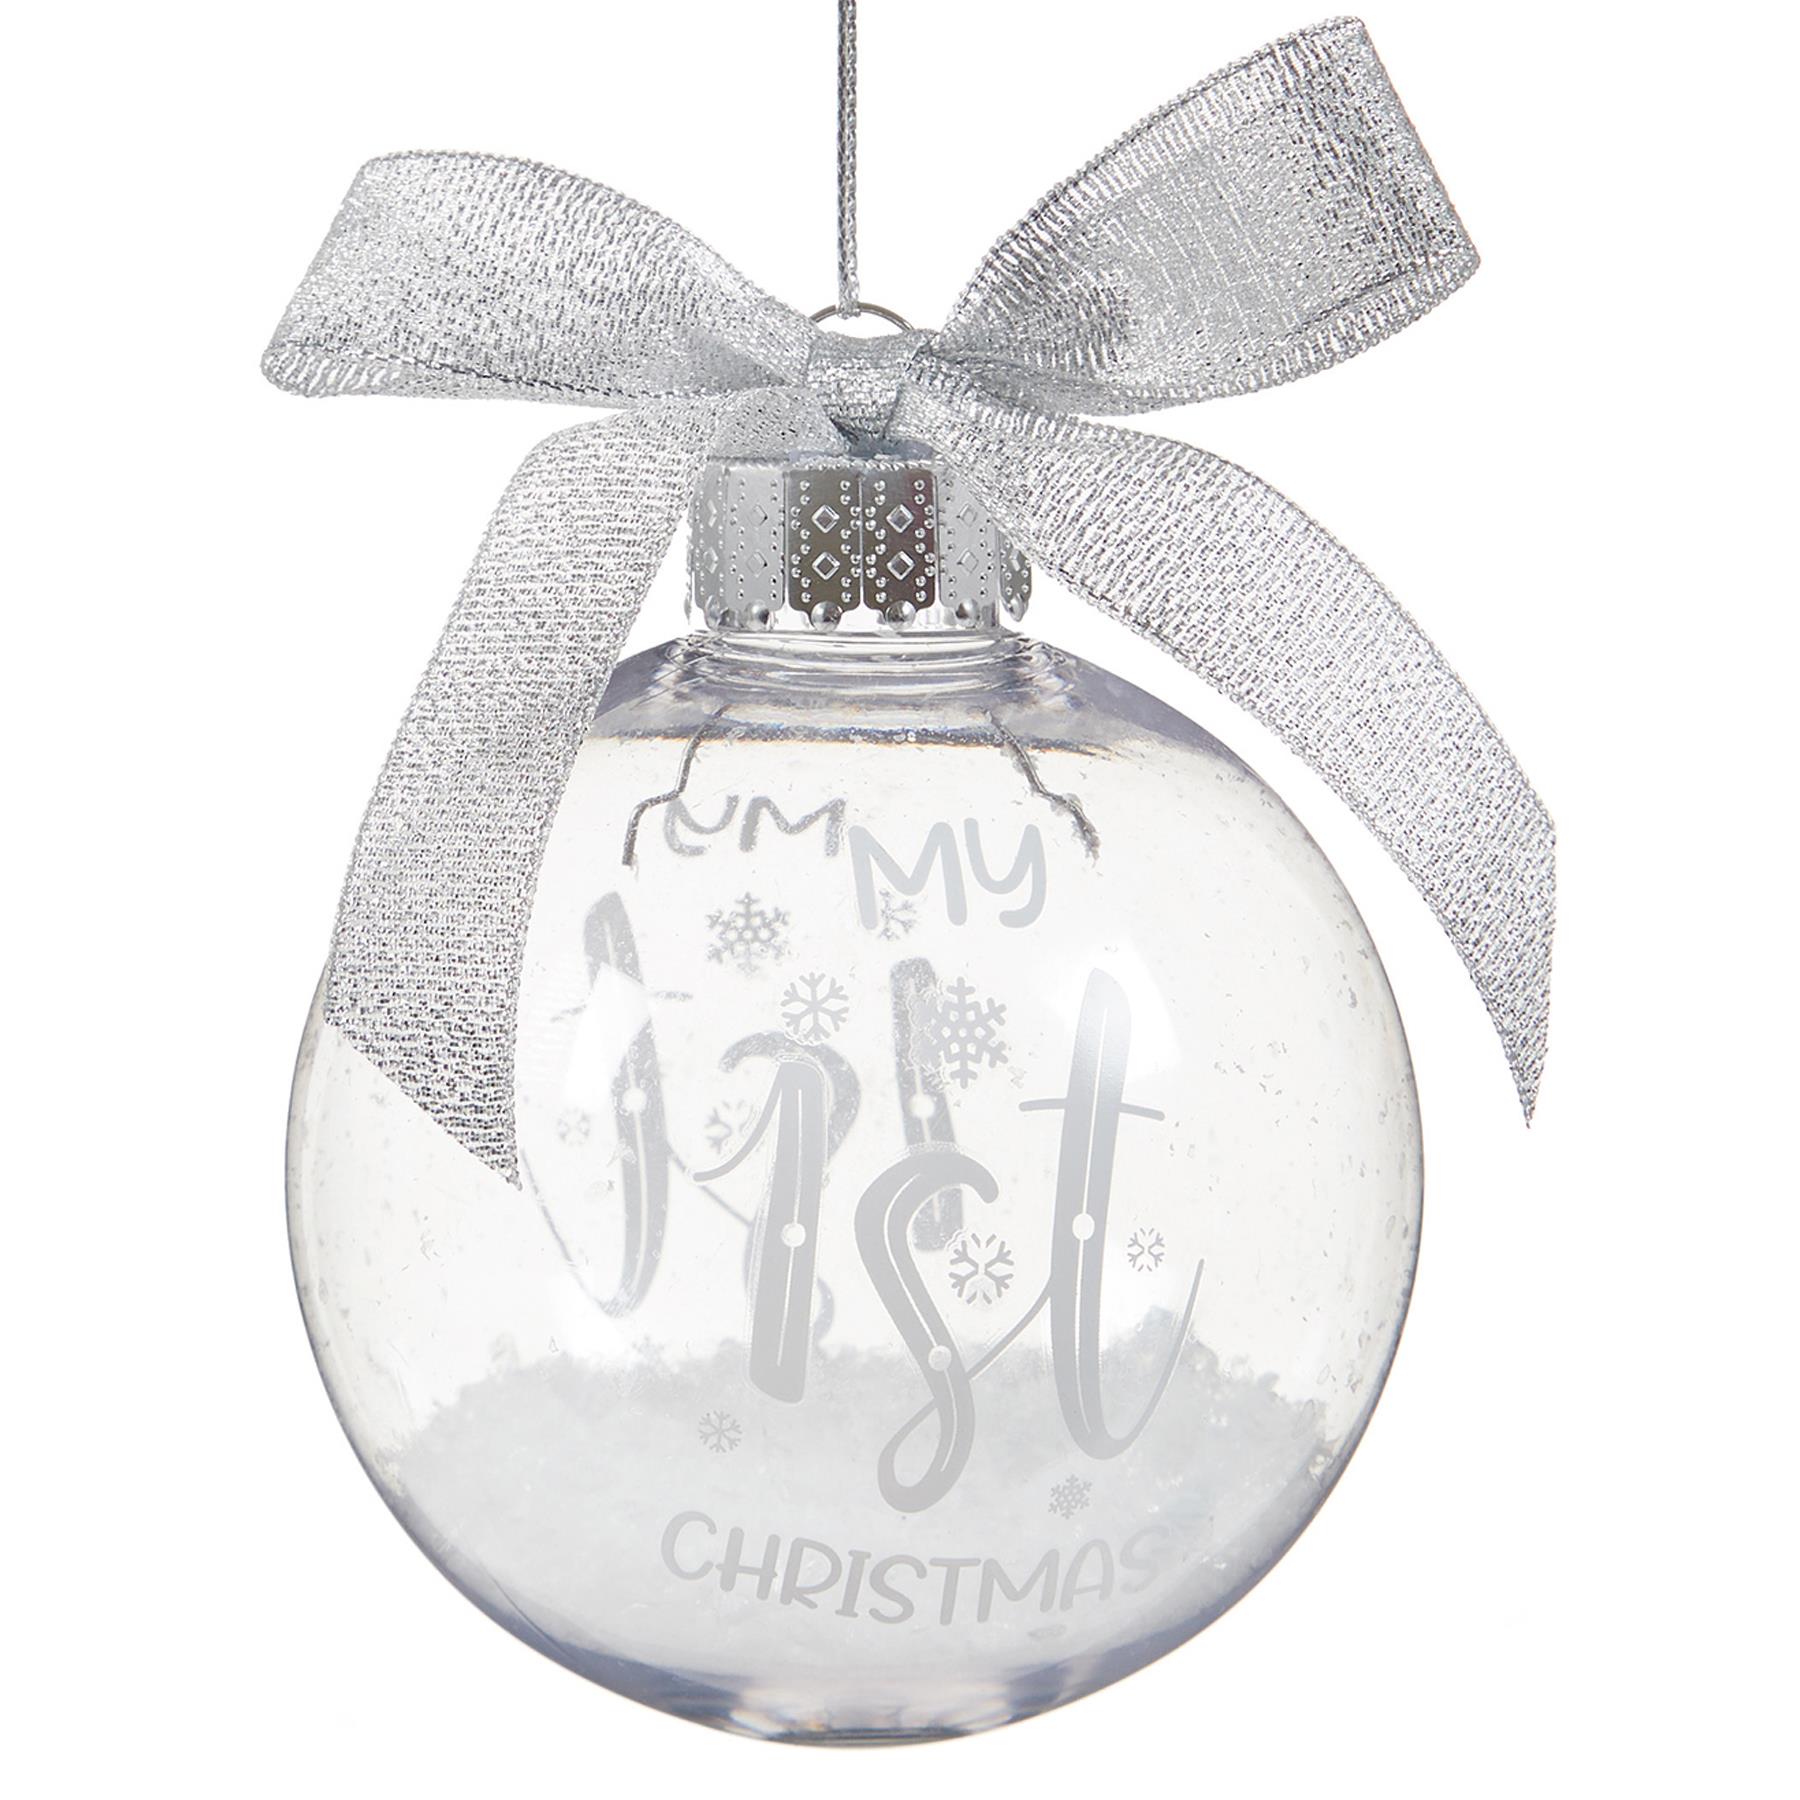 My 1st Christmas Filled Bauble Tree Ornament Decoration